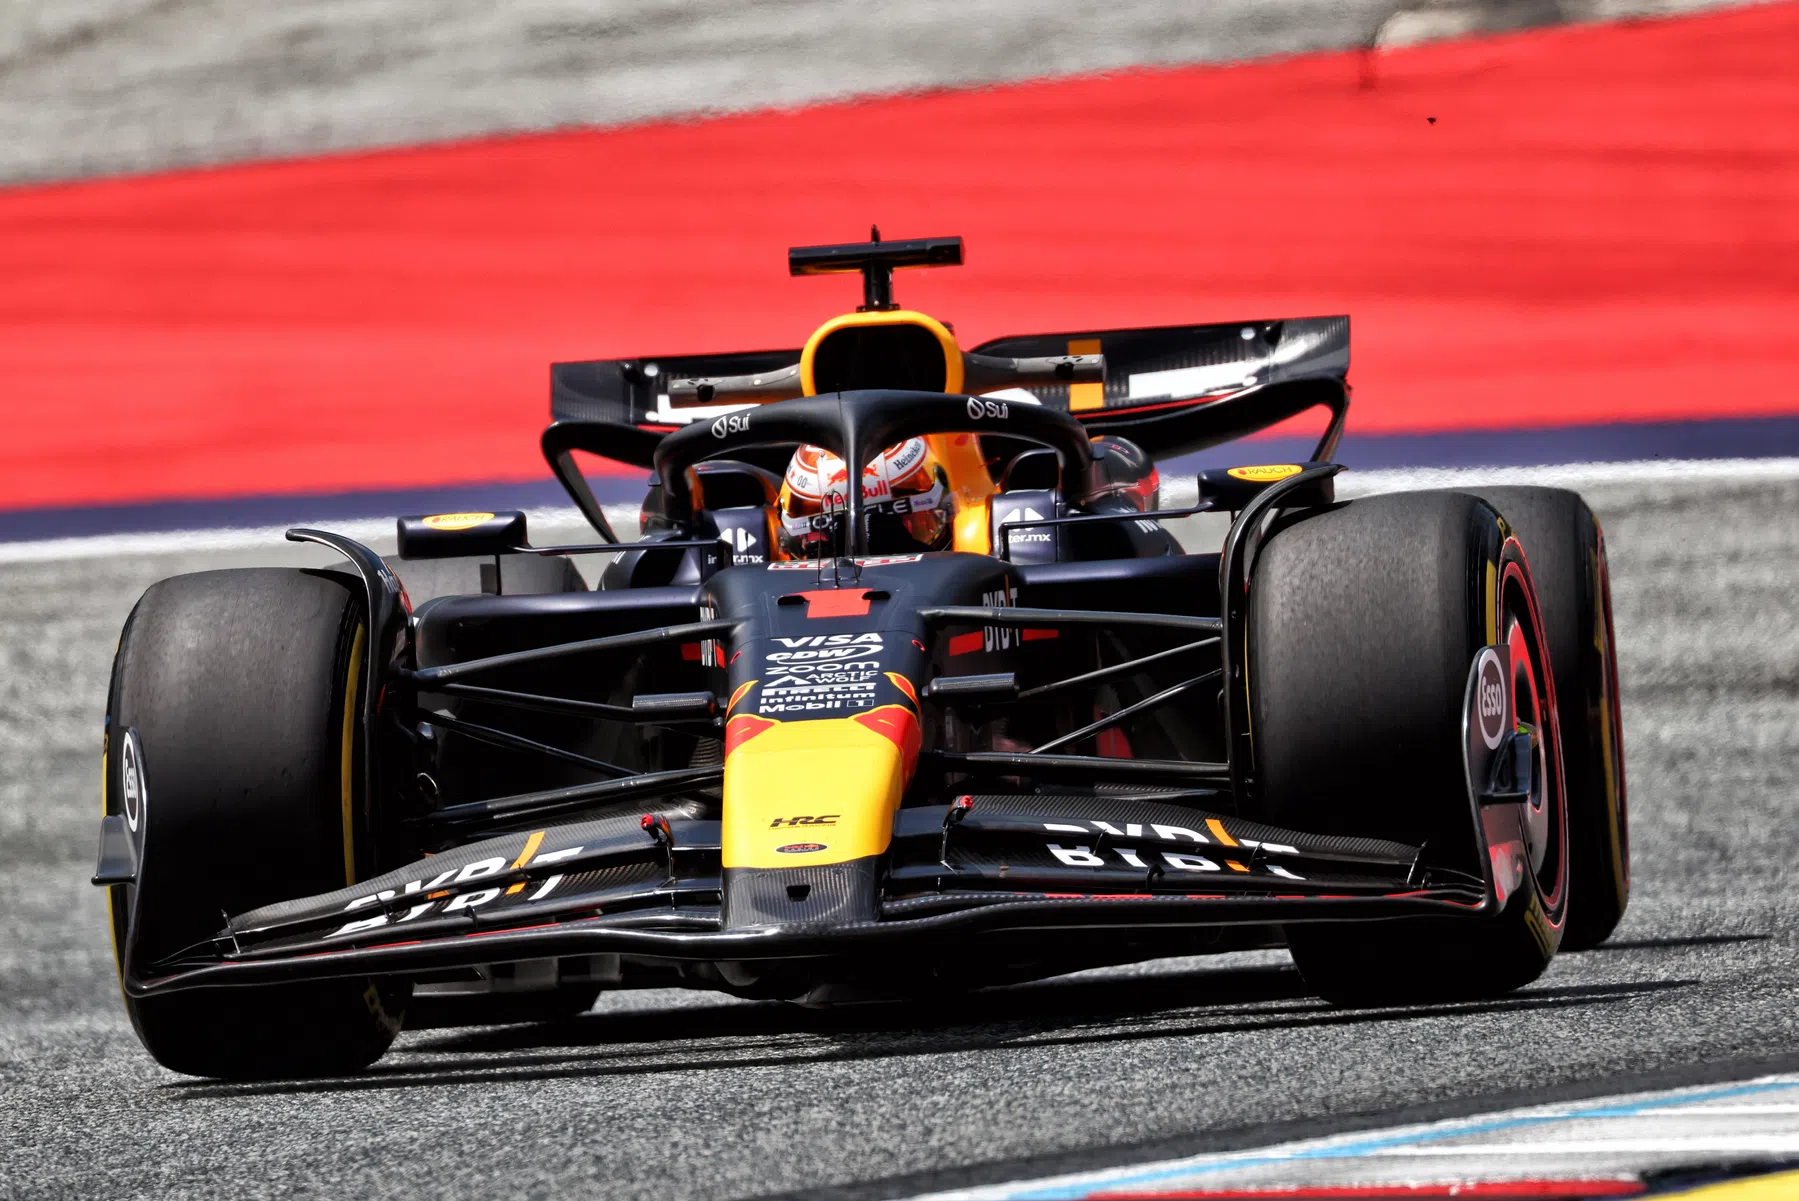 Verstappen causes red flag and finishes fastest in practice